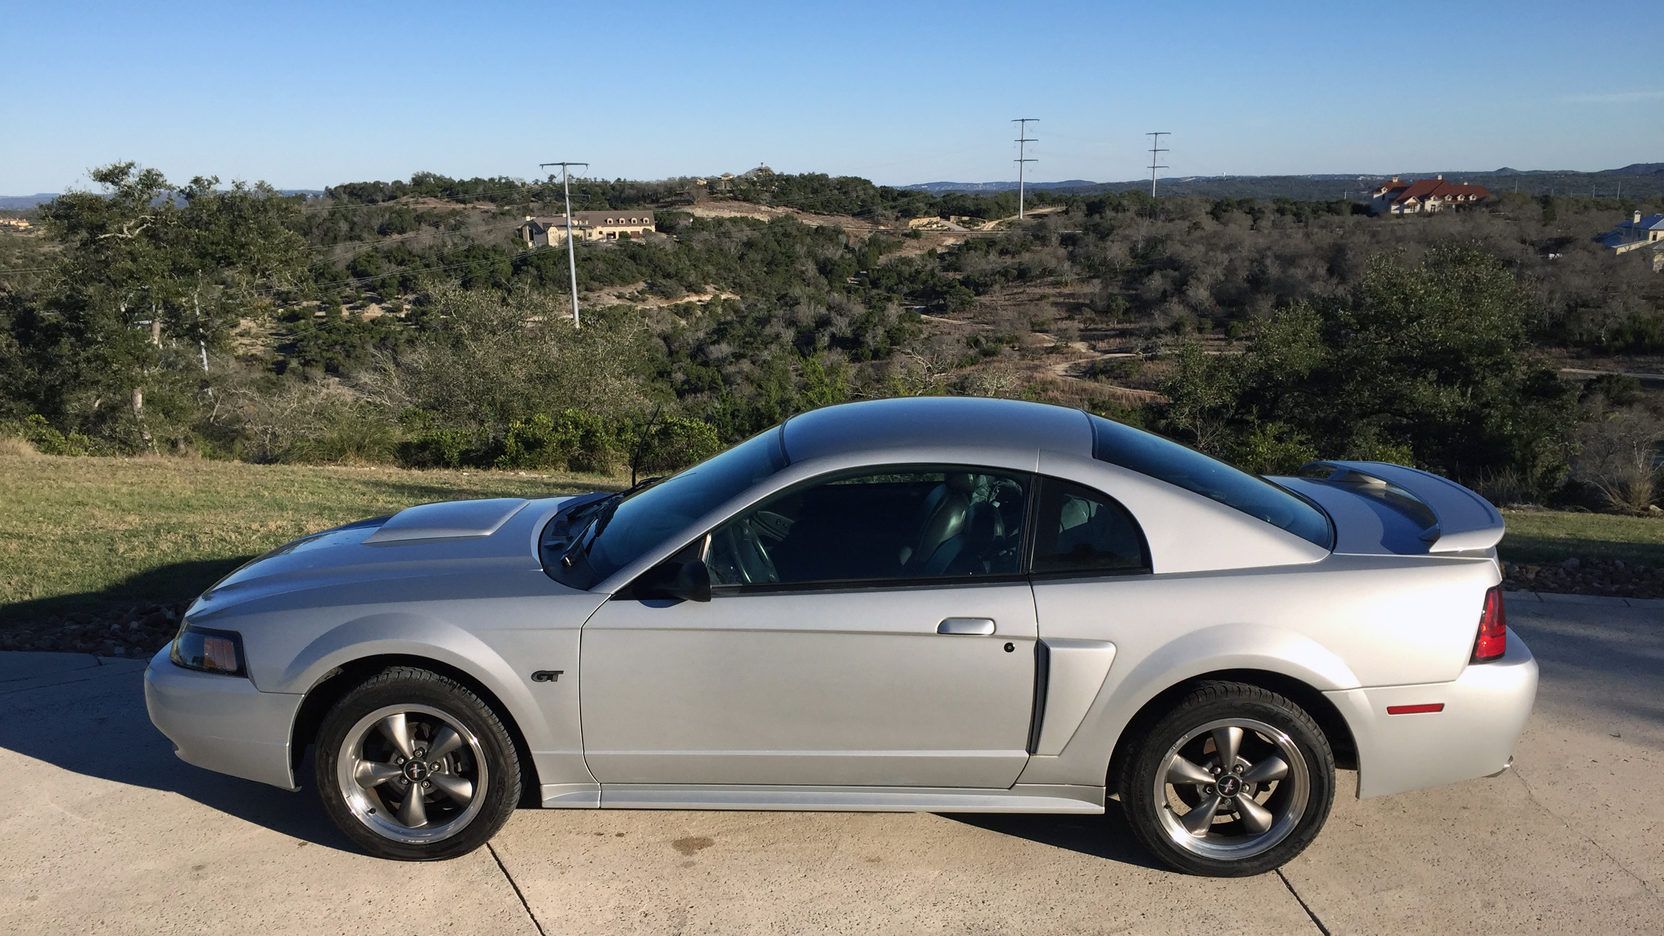 2000 Ford Mustang GT: The perfect project muscle car.